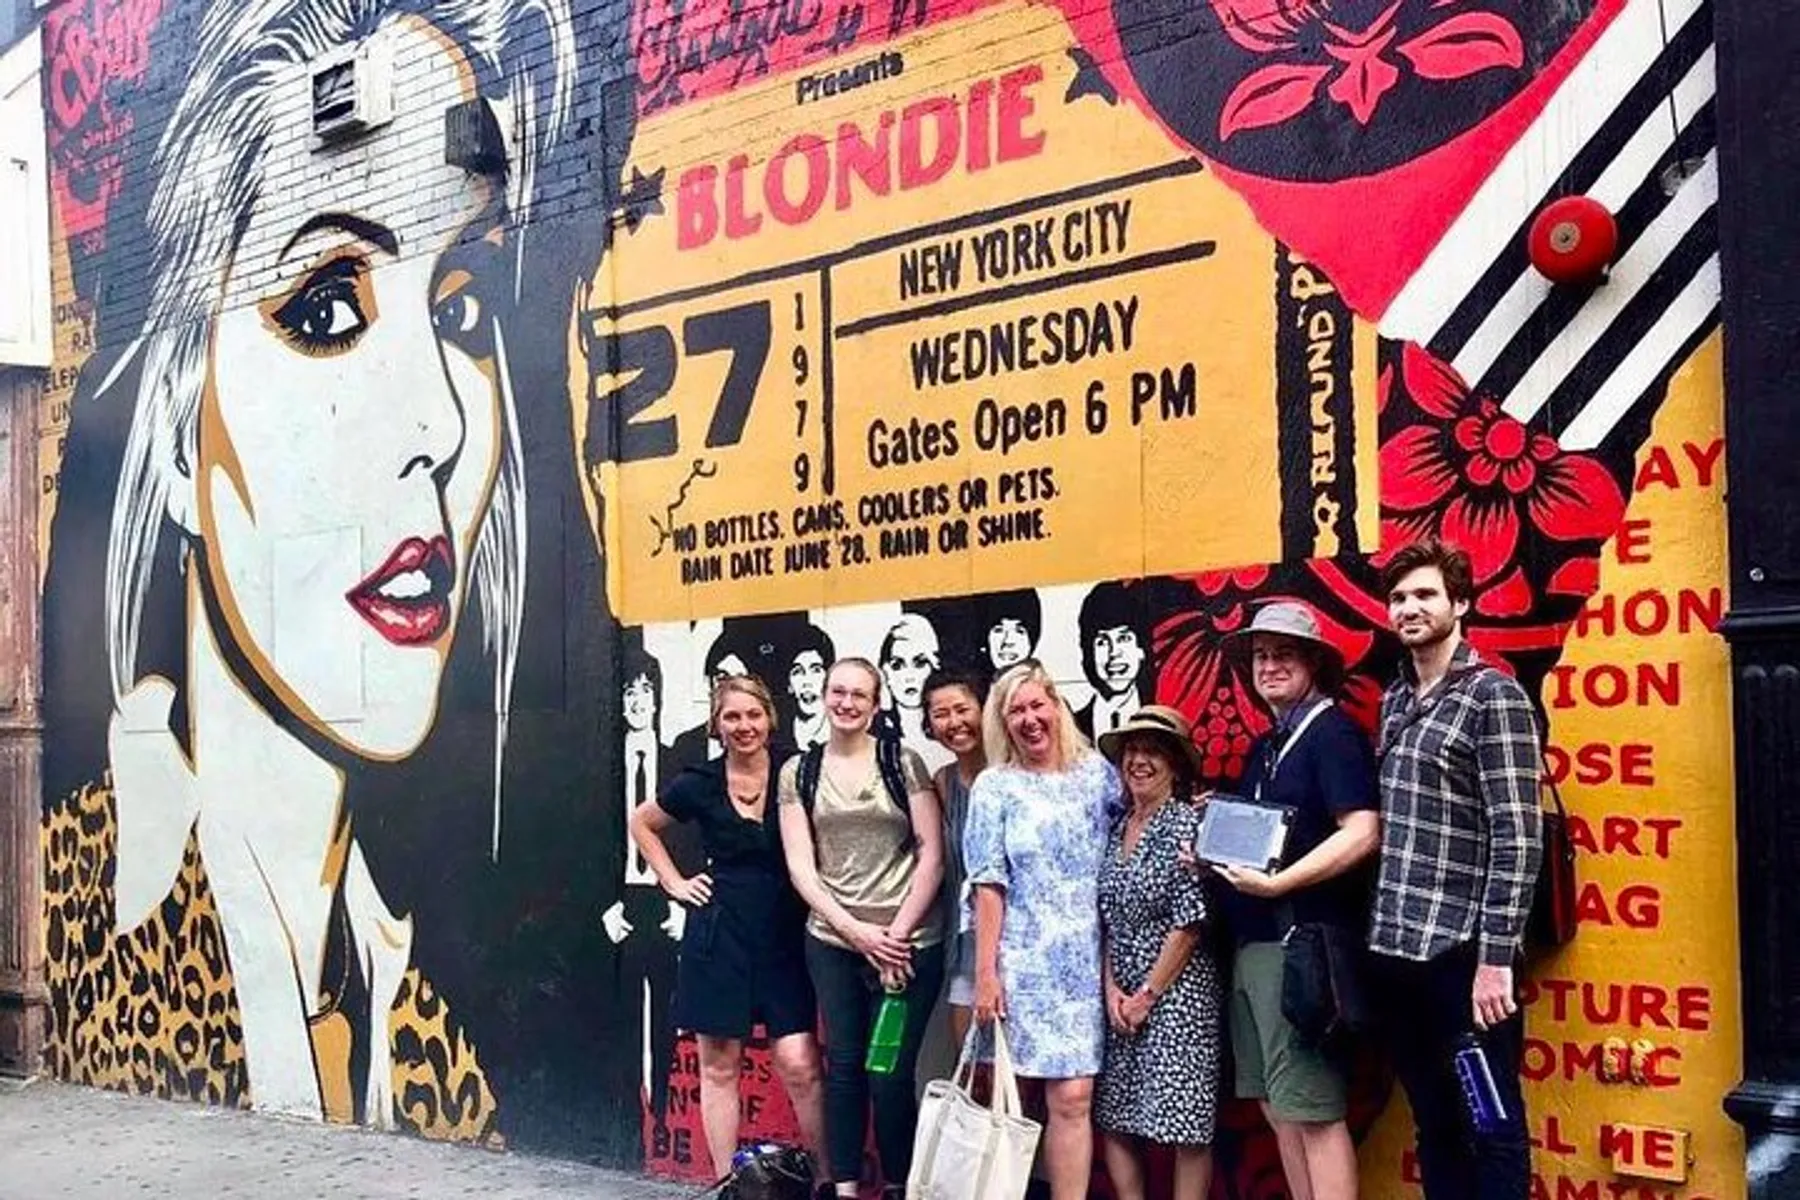 A group of people is smiling for the camera in front of a vibrant street mural advertising a Blondie concert in New York City.